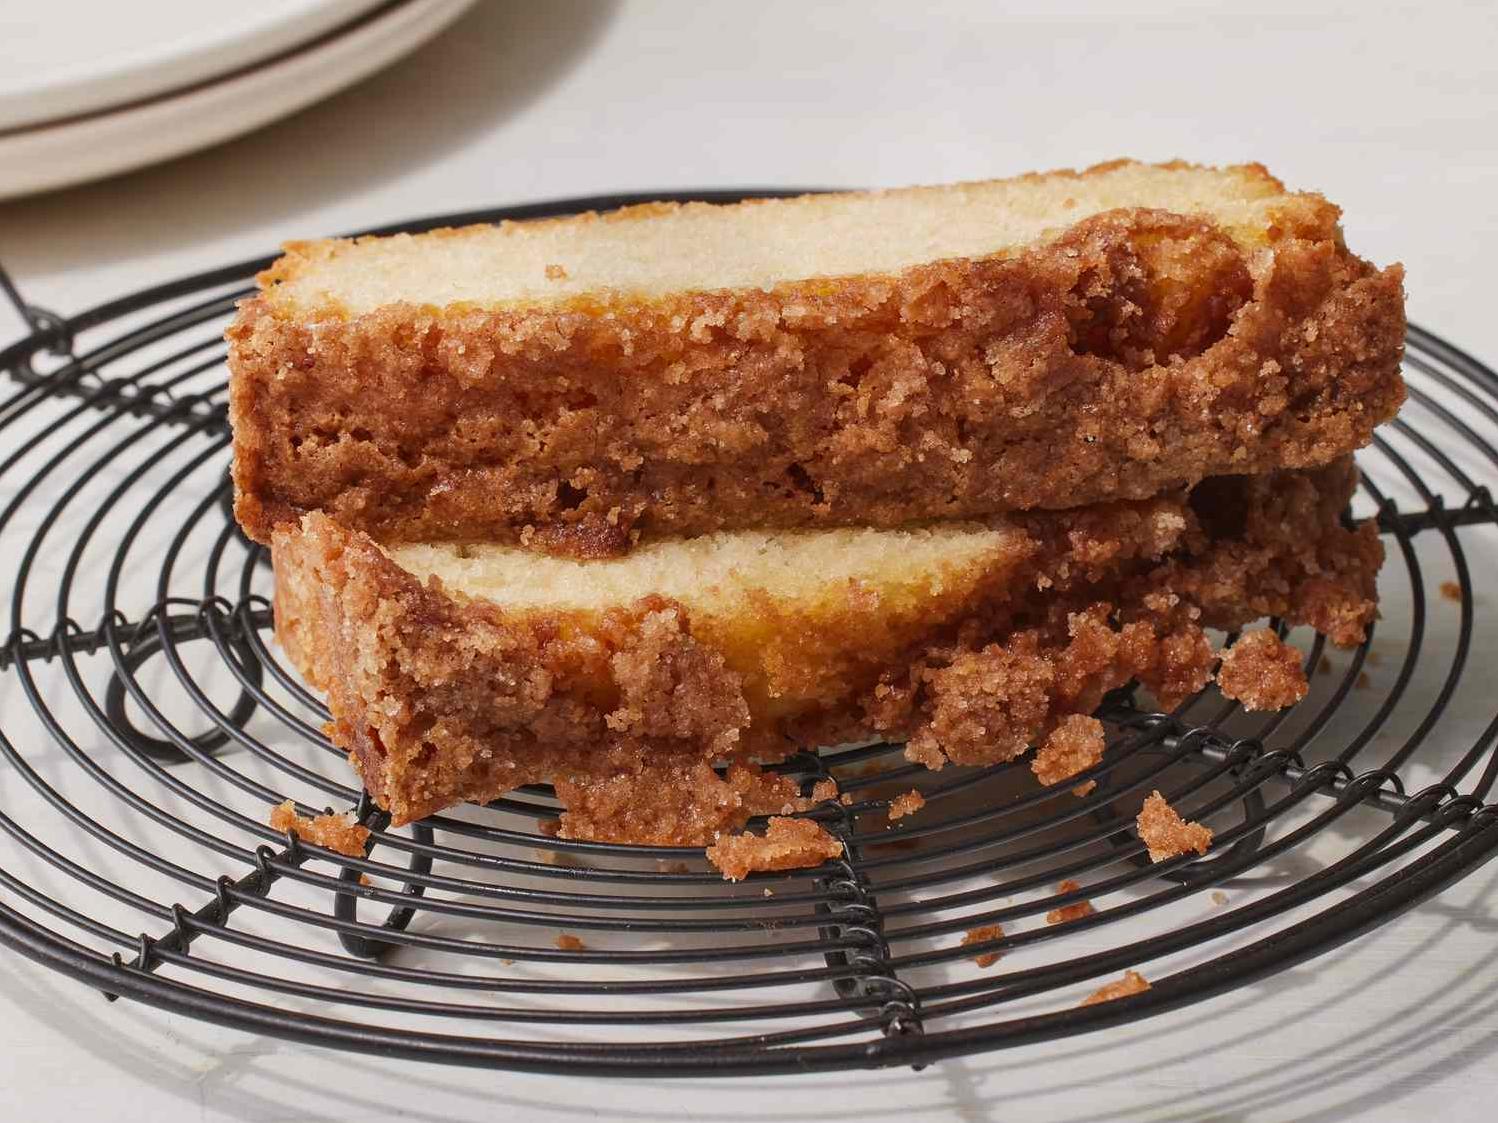 Delicious Coffee Cake Recipe to Satisfy Your Cravings